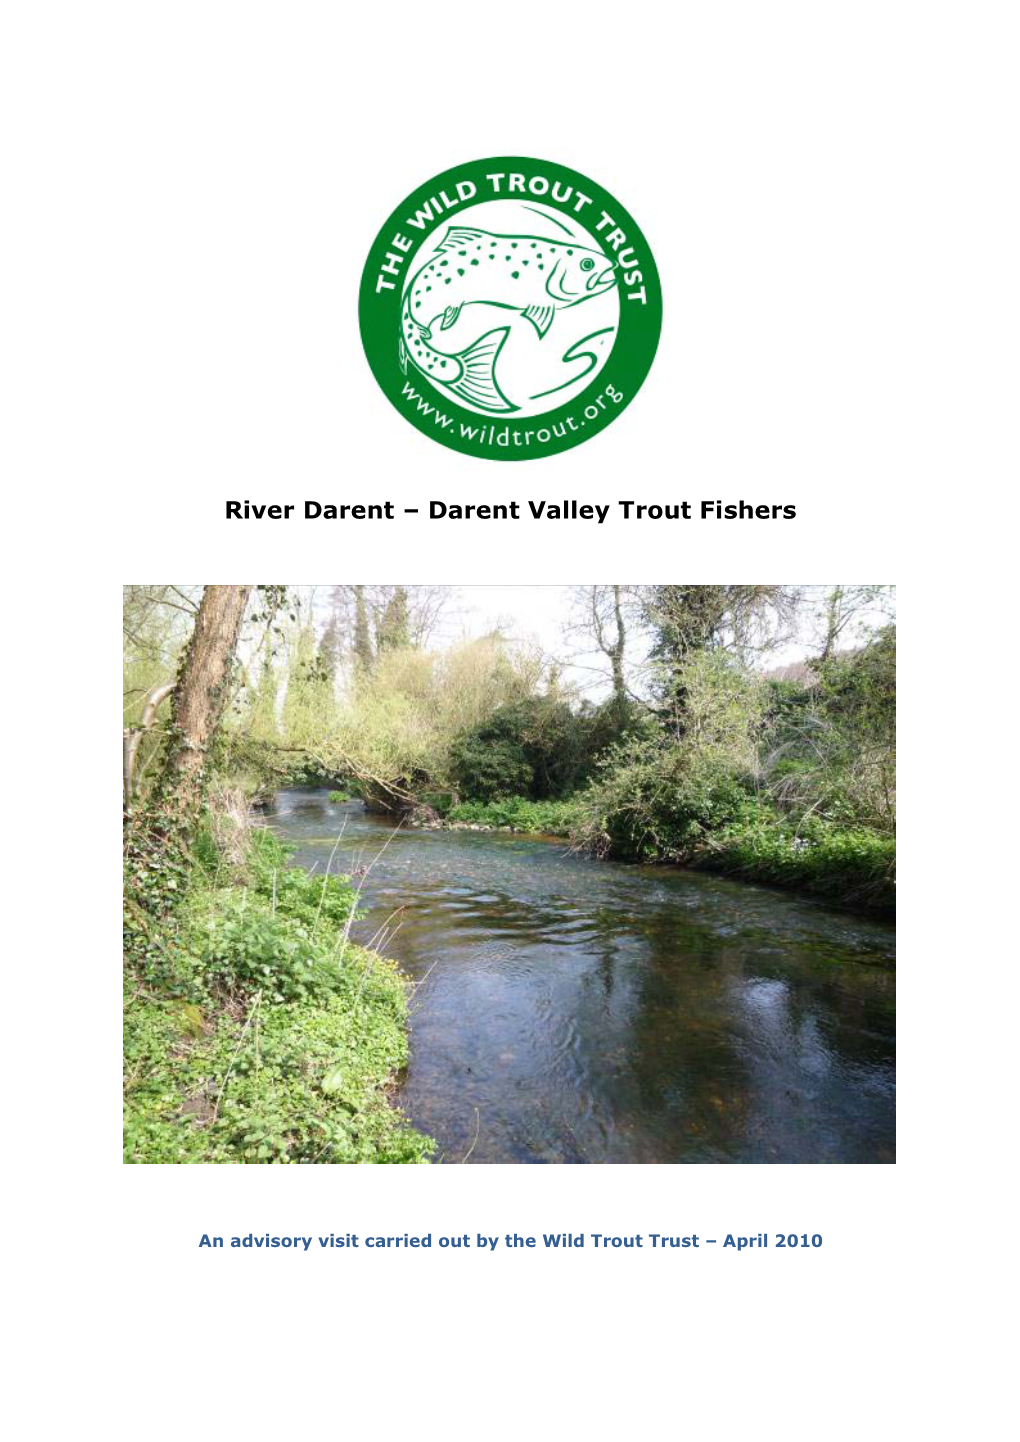 River Darent – Darent Valley Trout Fishers